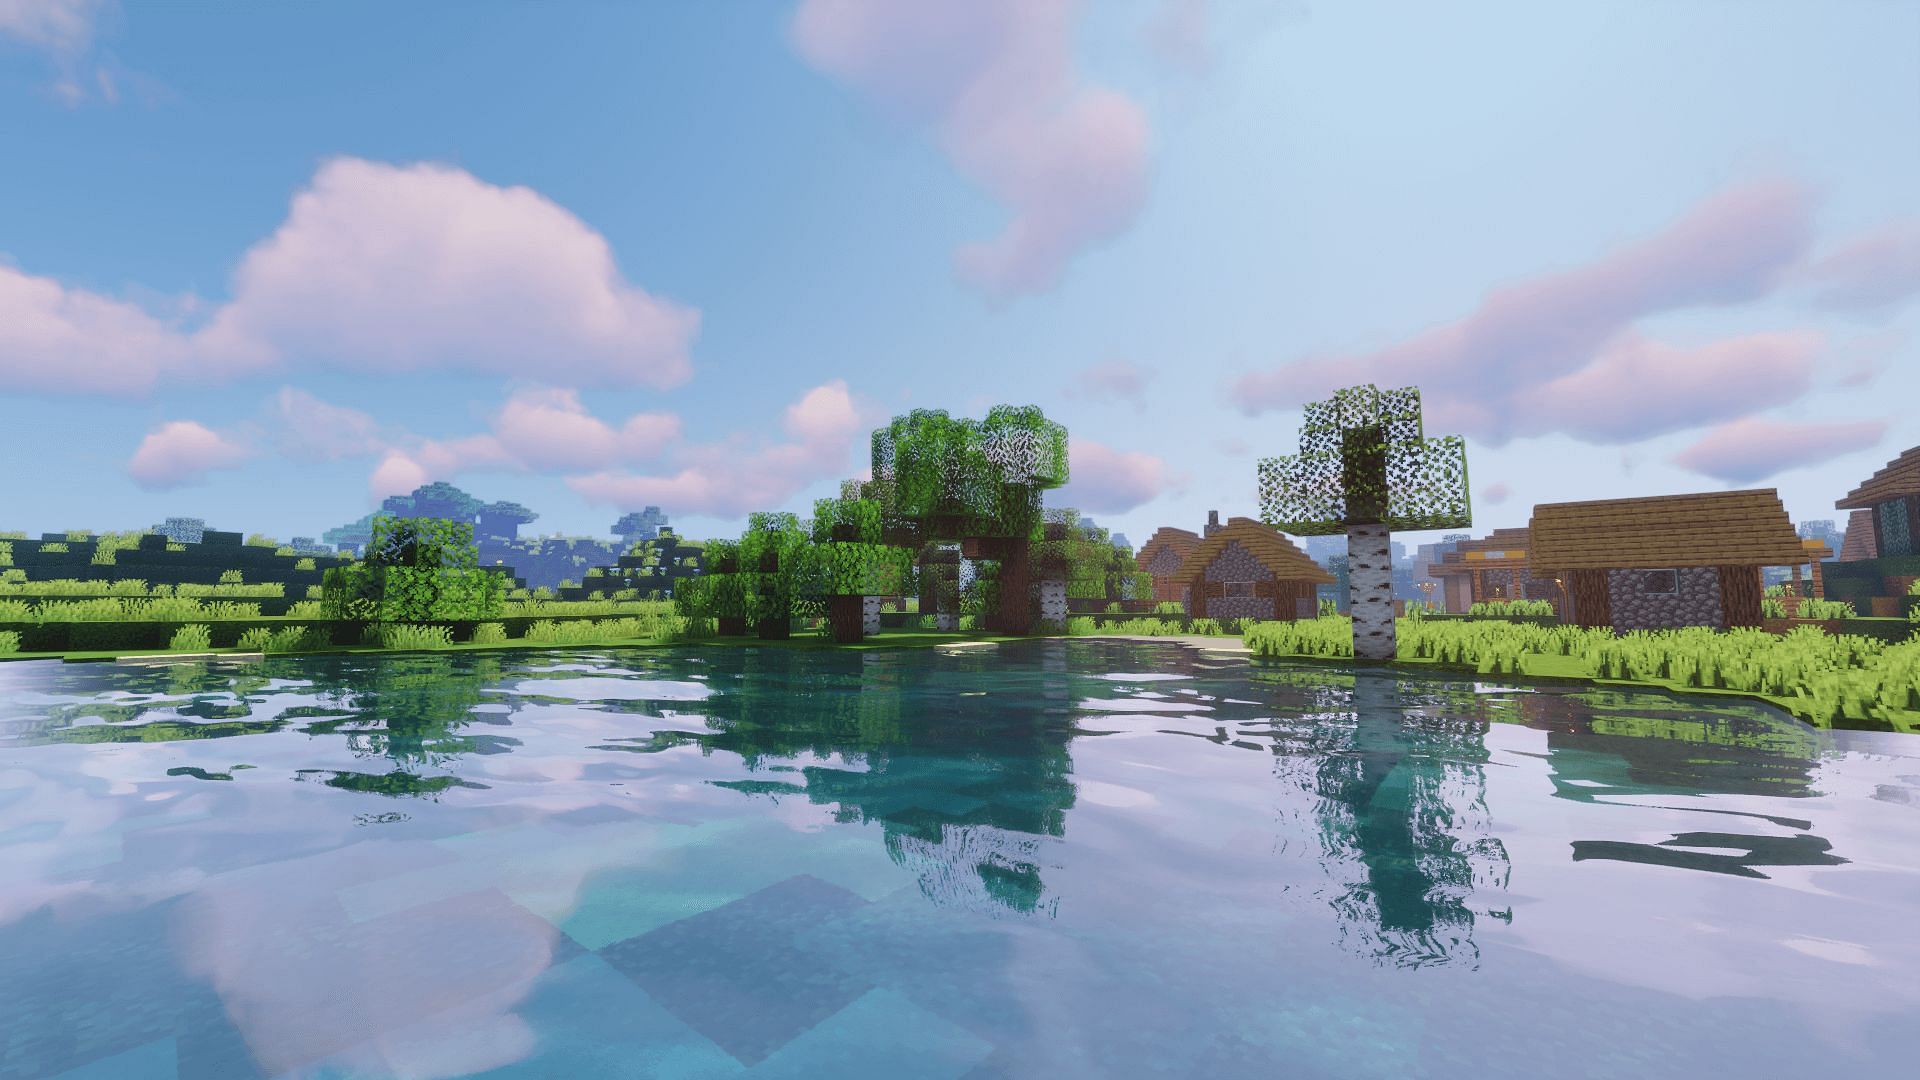 great minecraft texture packs that work with sildurs vibrant shaders